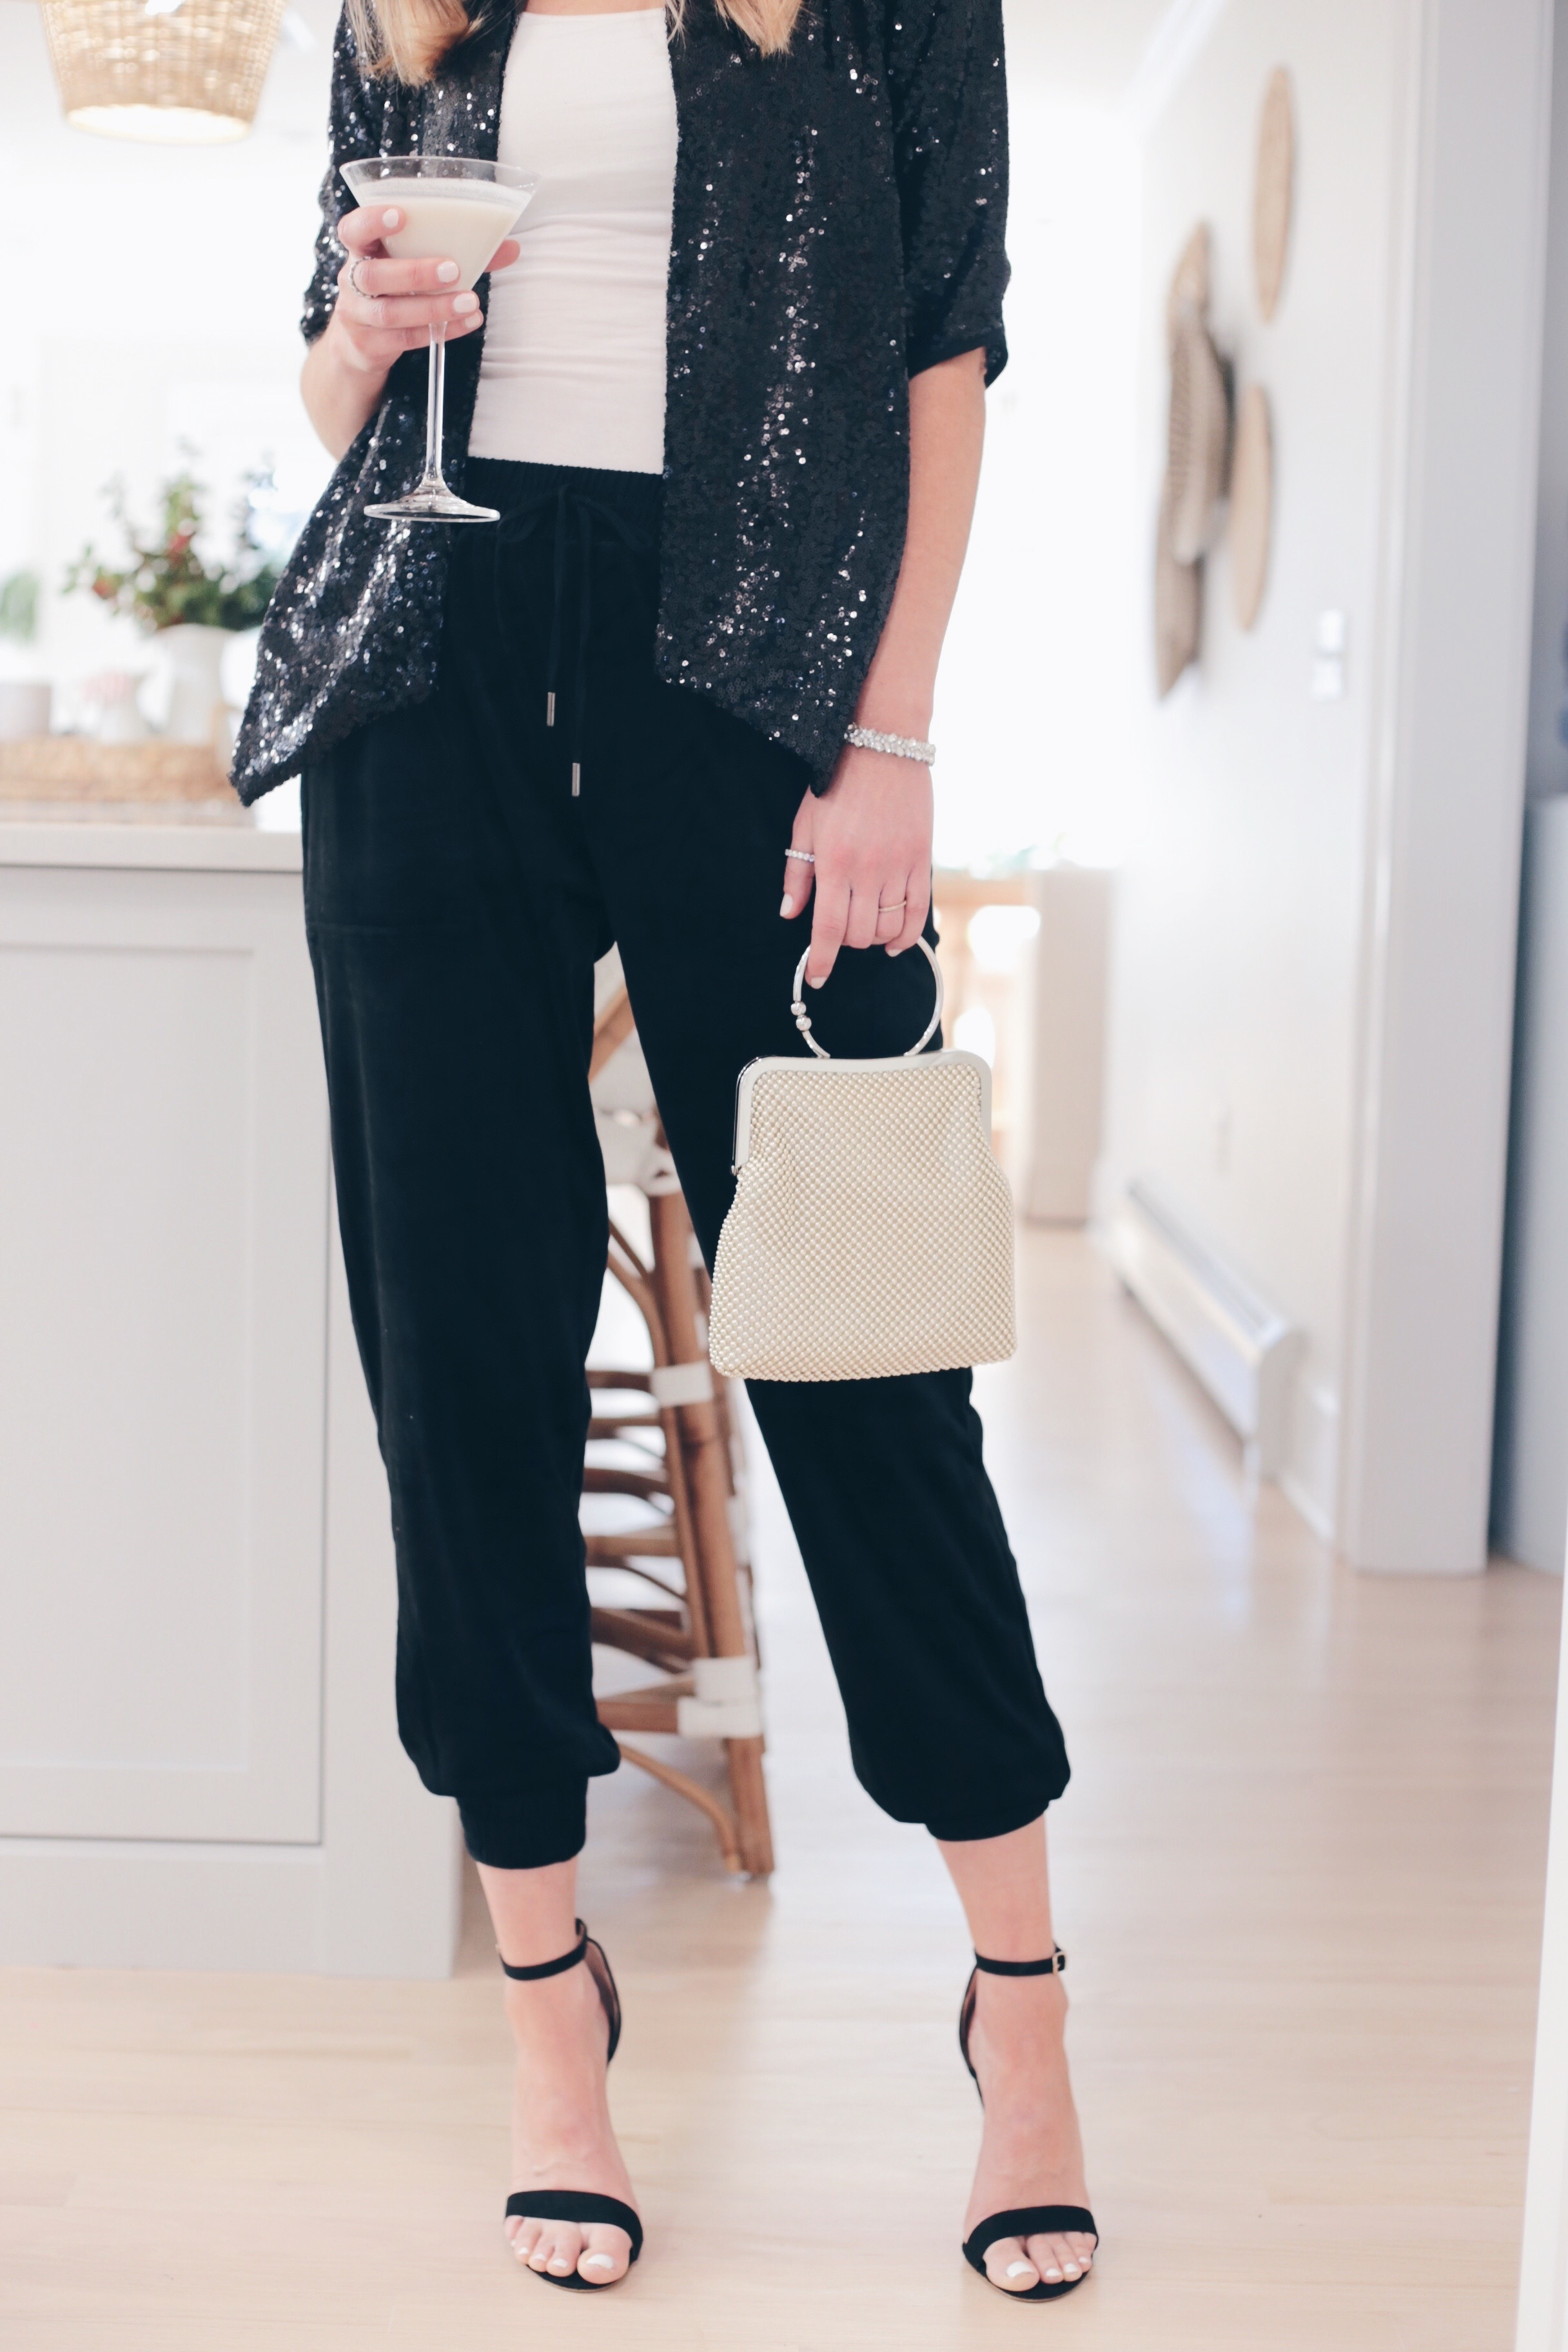 Walmart Style | Black Sequin Blazer | Affordable Holiday Outfit Idea